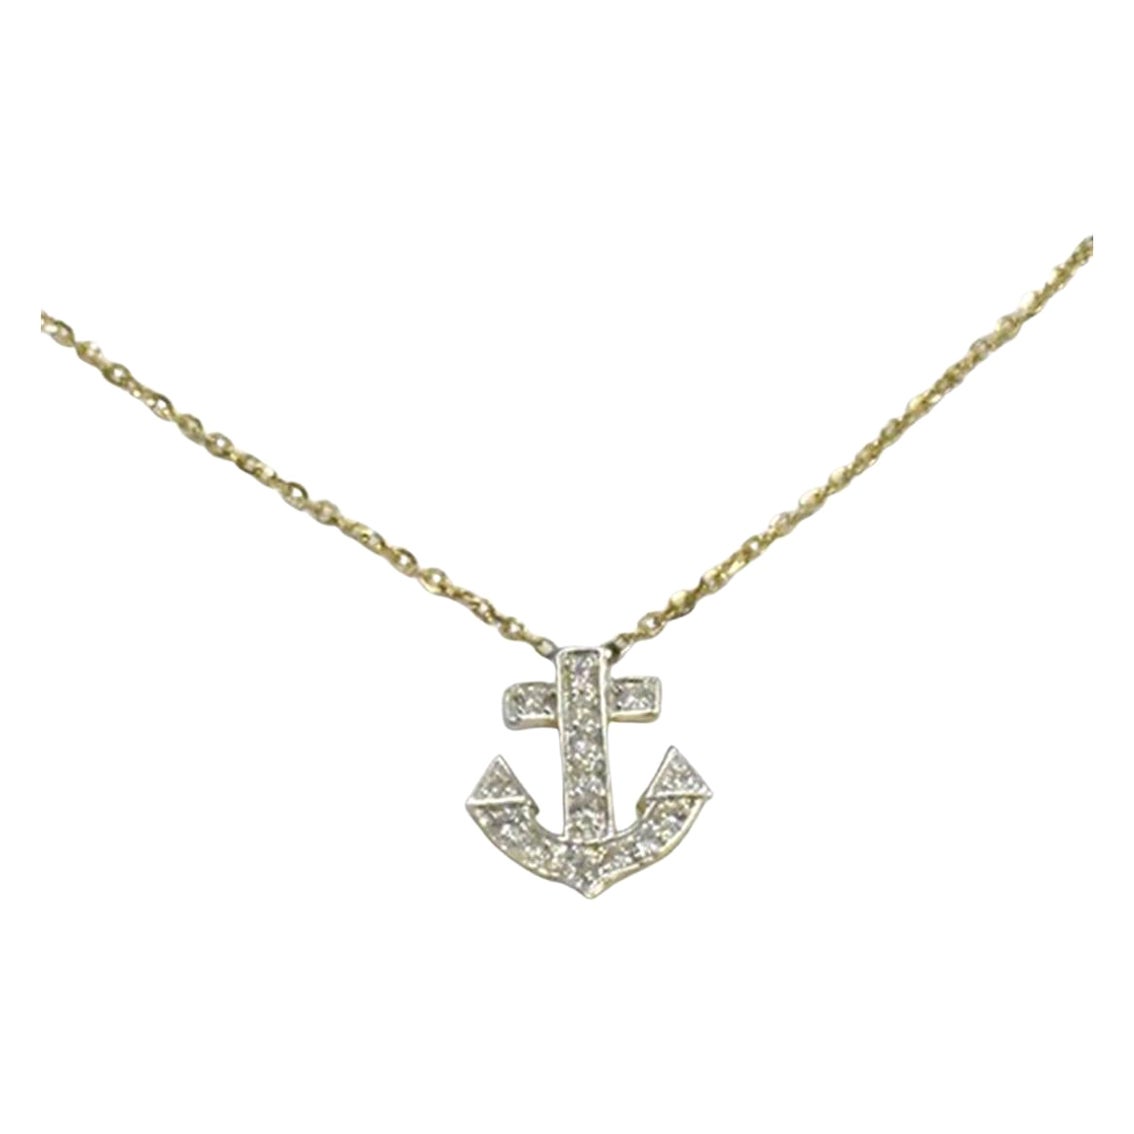 Diamond Anchor Pendant Necklace is made of 14k solid gold.
Available in three colors of gold: White Gold / Rose Gold / Yellow Gold.

Lightweight and gorgeous natural genuine round cut diamond. Each diamond is hand selected by me to ensure quality